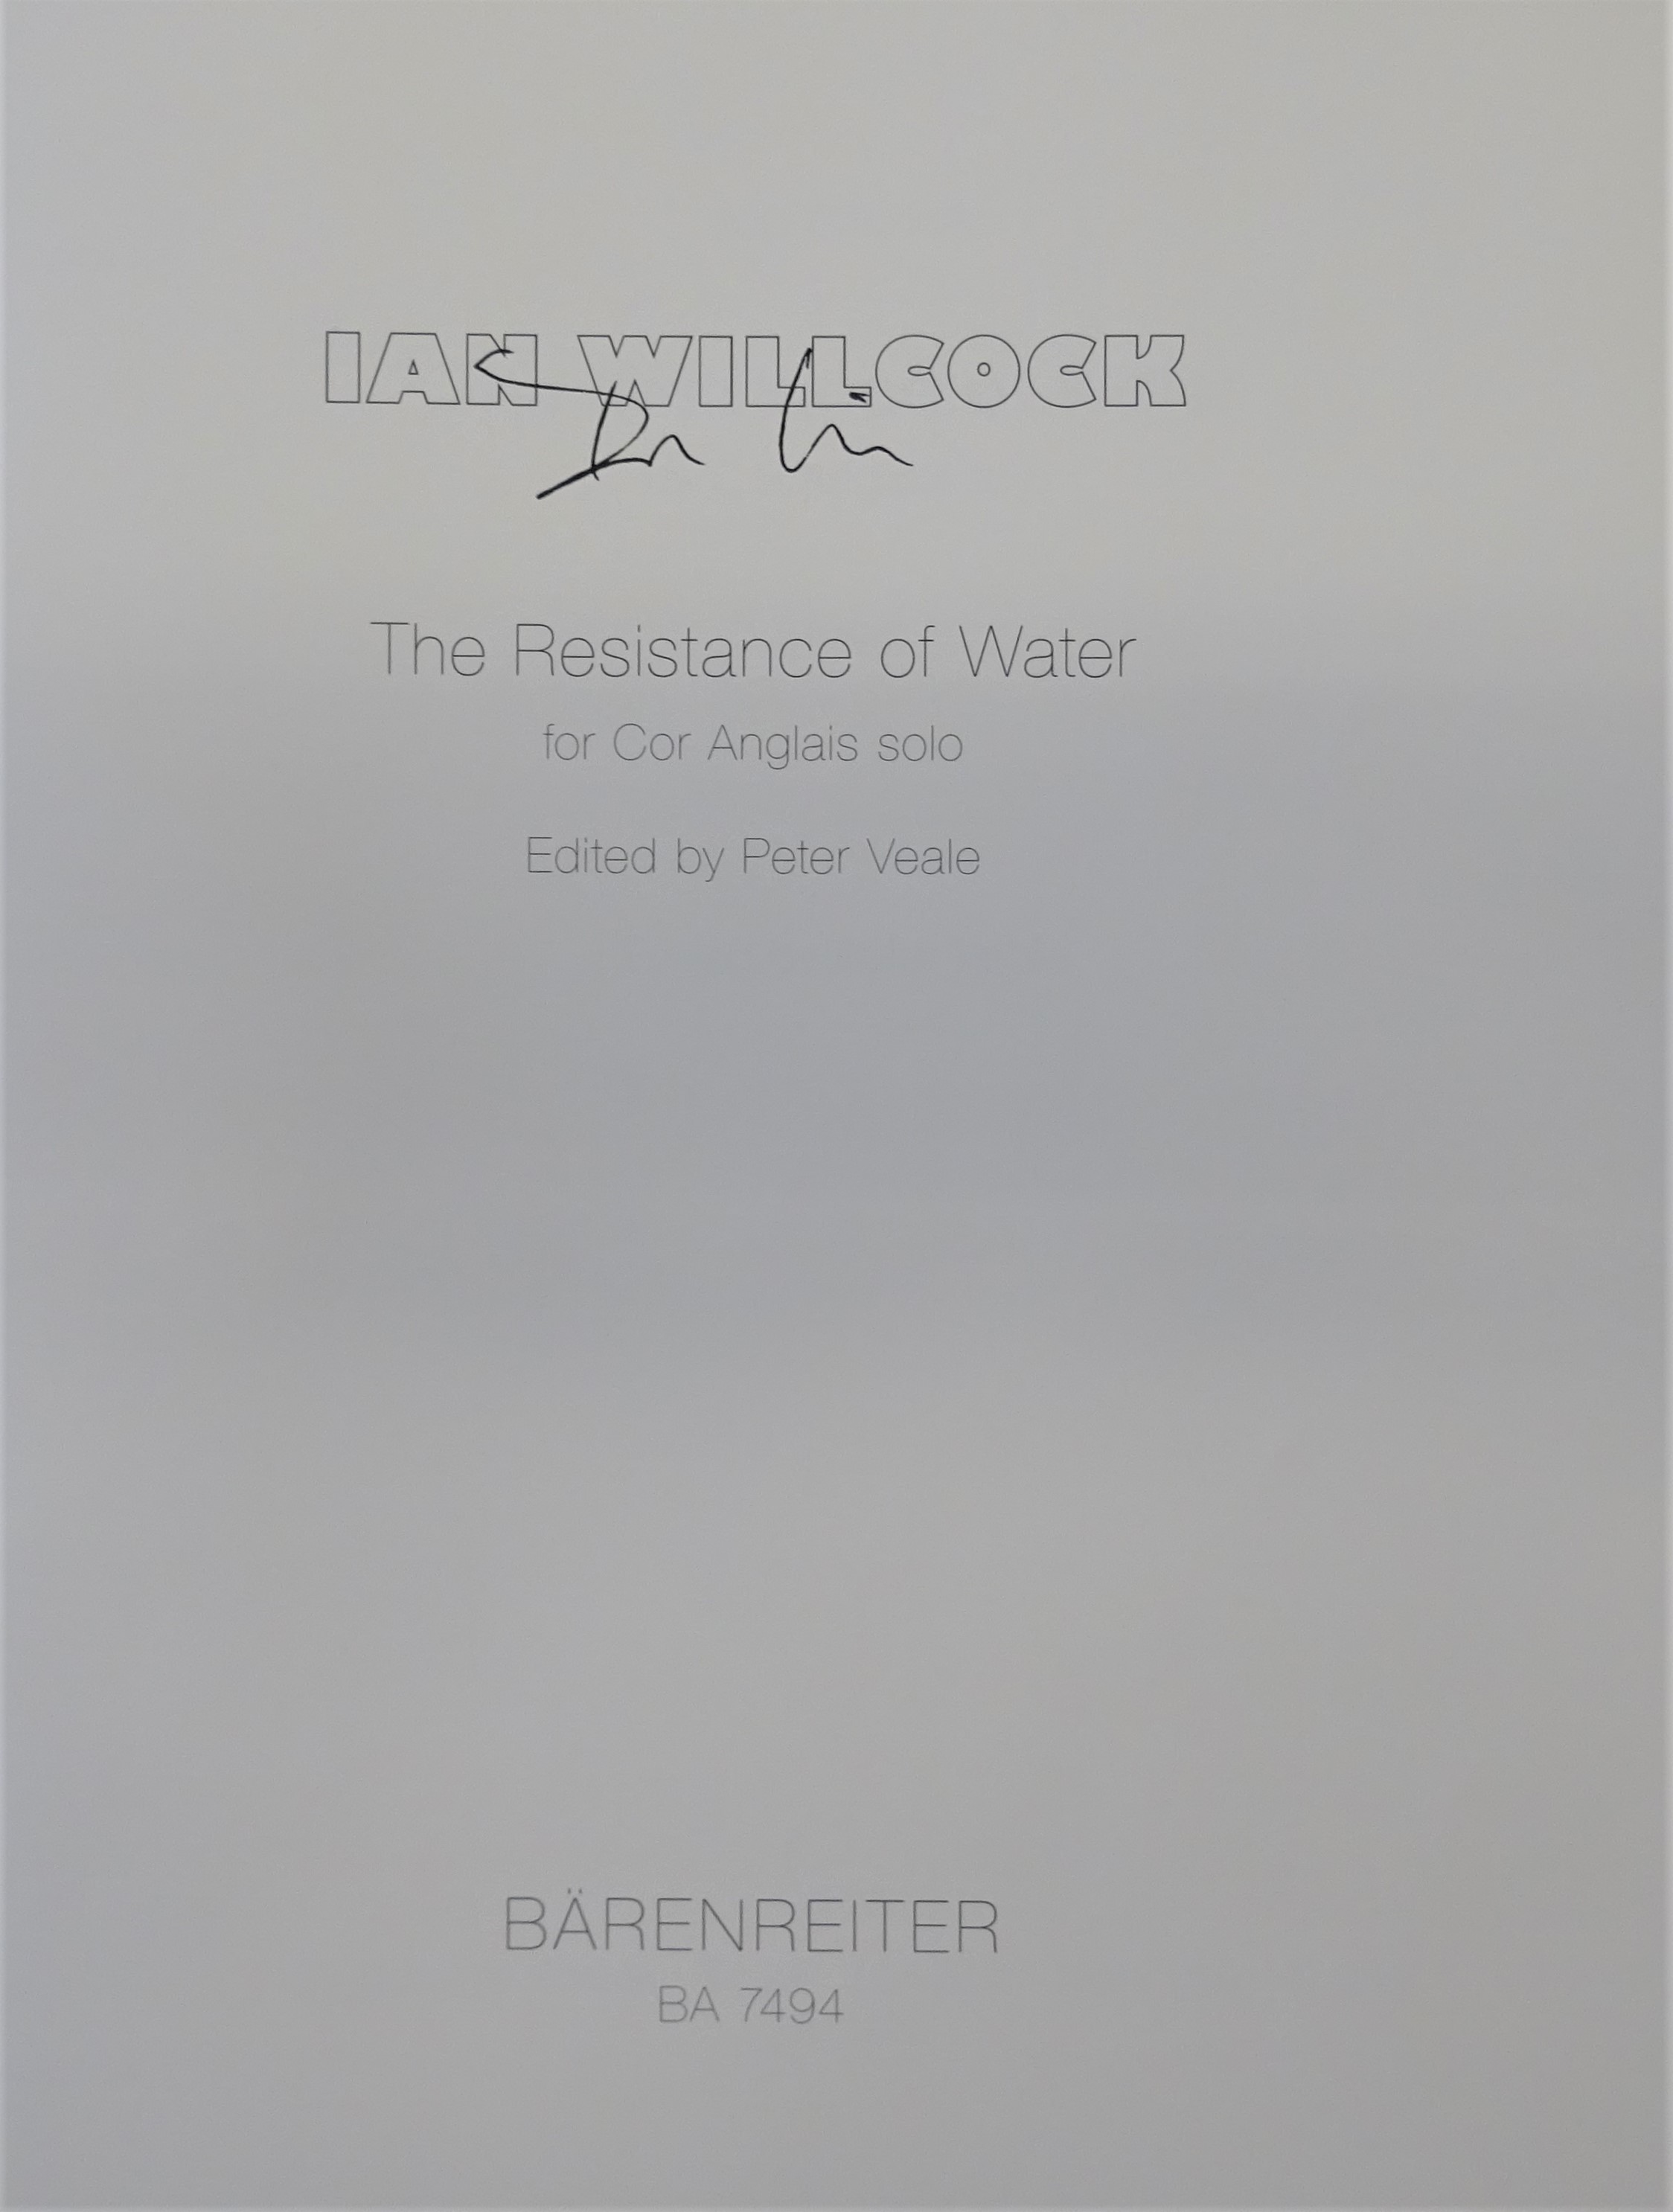 I. Willcock: The resistance of water<br>fr Engl. Horn solo